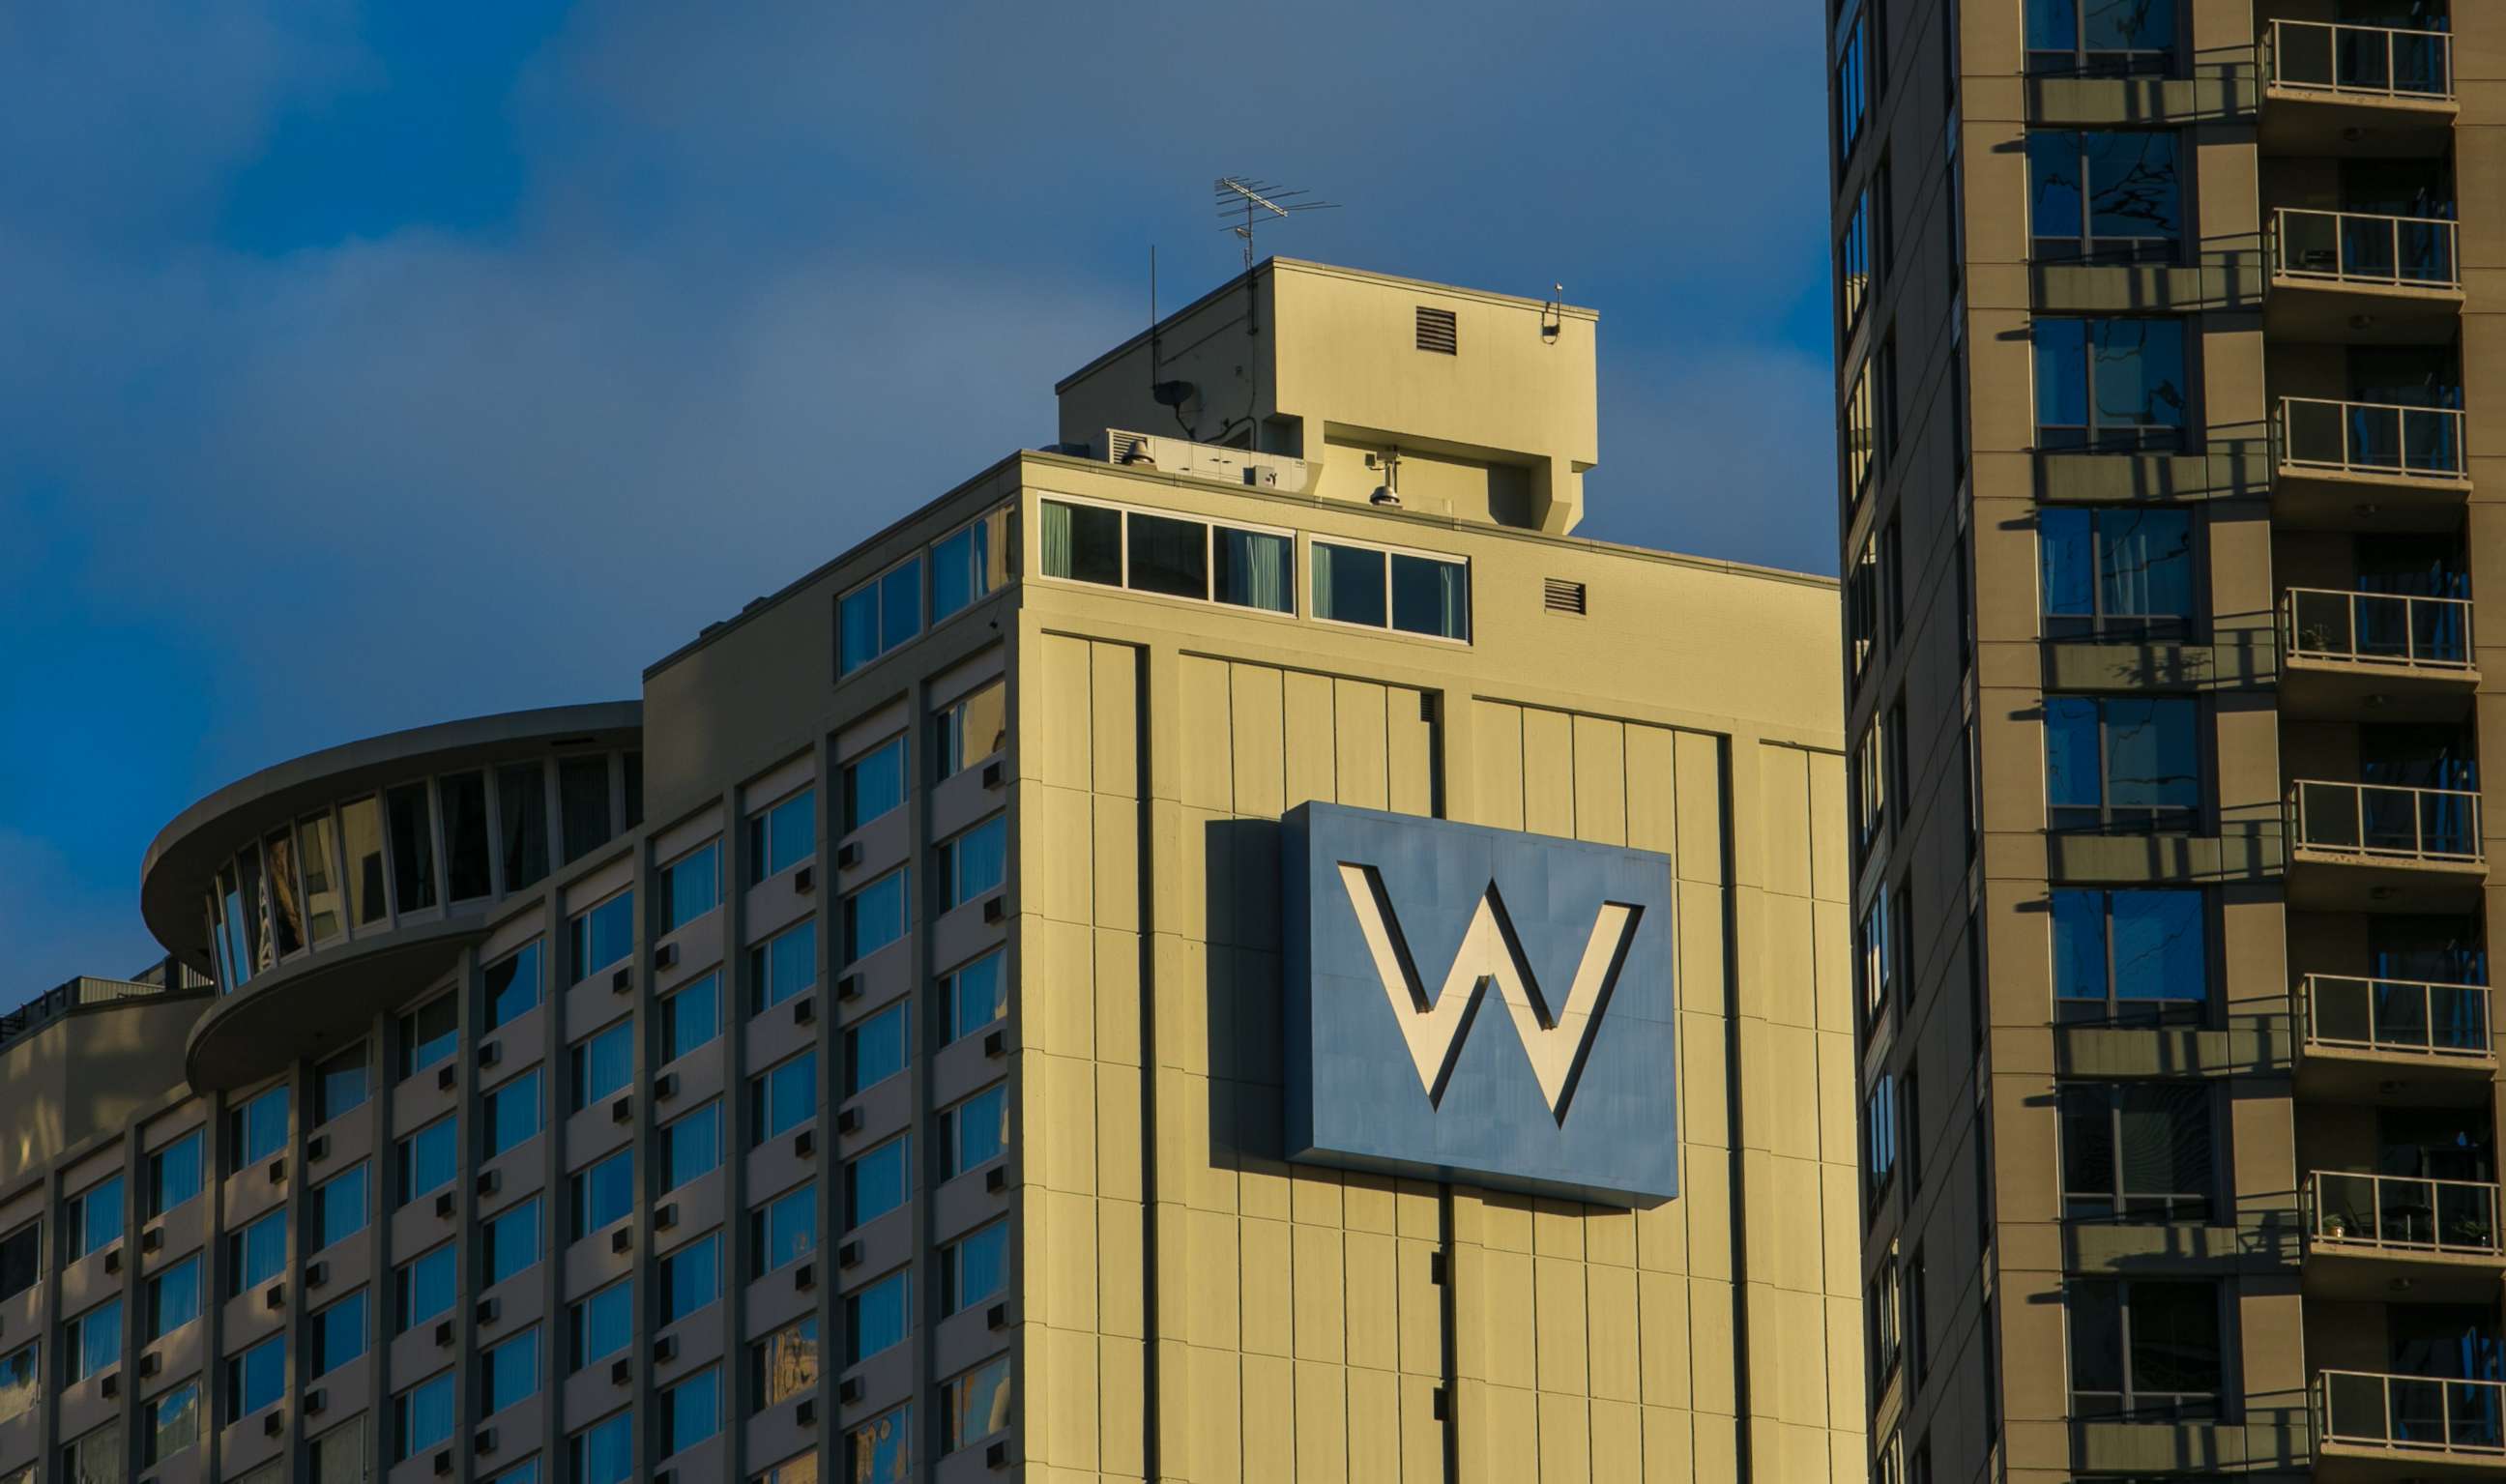 PHOTO: The exterior of the W Hotel near Lake Shore Drive is viewed on Oct. 10, 2015, in Chicago.